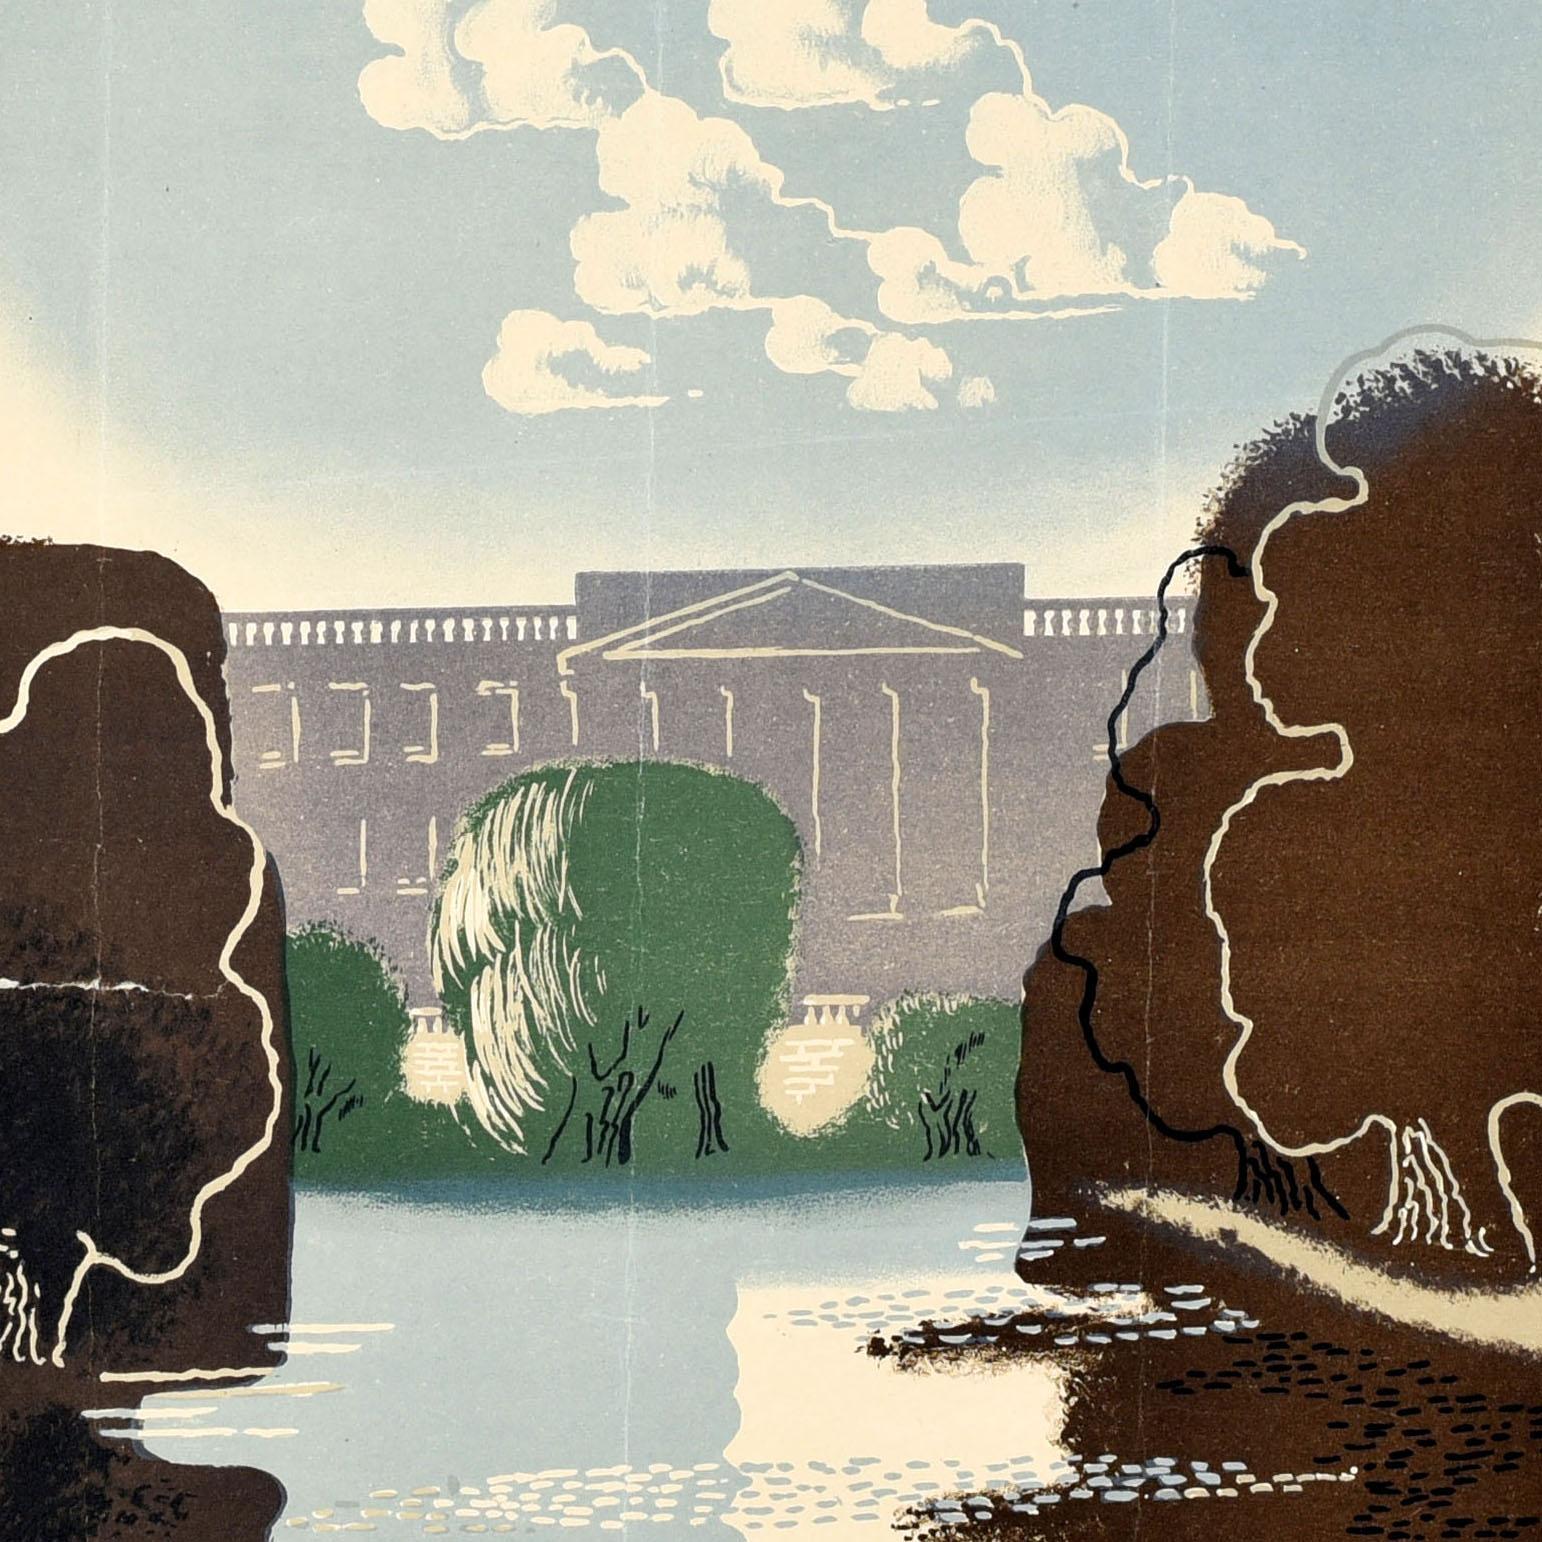 Original Vintage London transport poster designed by one of the most renowned poster artists of the 20th century Edward McKnight Kauffer (1890-1954) featuring a scenic view of Buckingham Palace from St. James's Park with the trees reflected on the